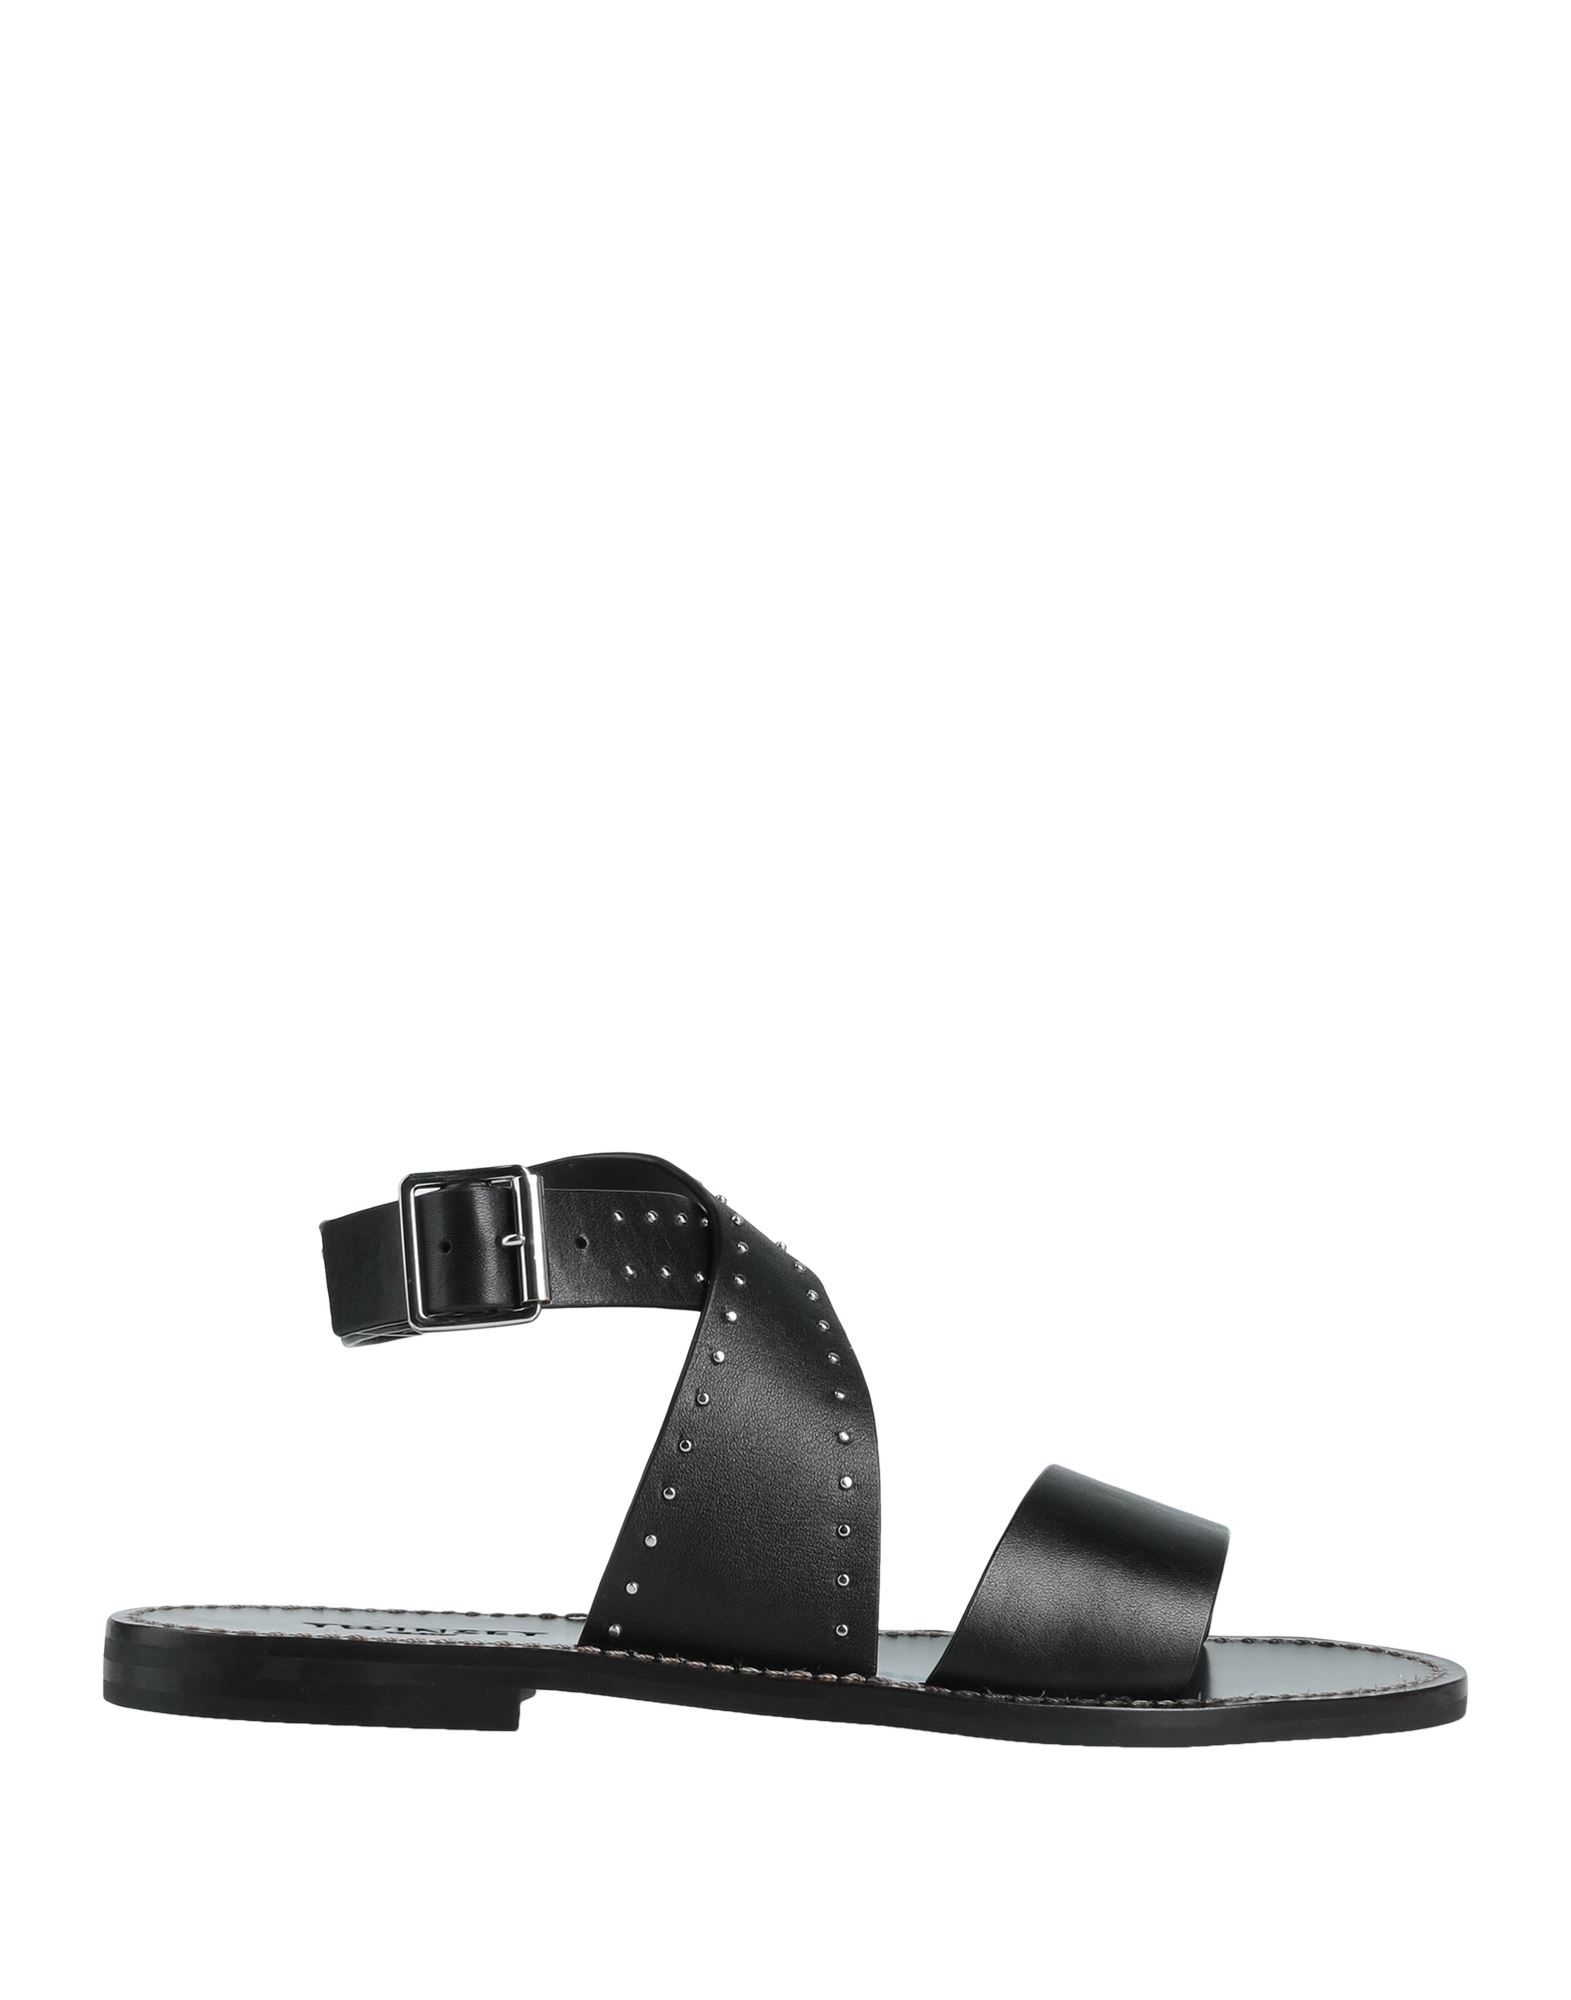 TWINSET TWINSET WOMAN SANDALS BLACK SIZE 6 SOFT LEATHER